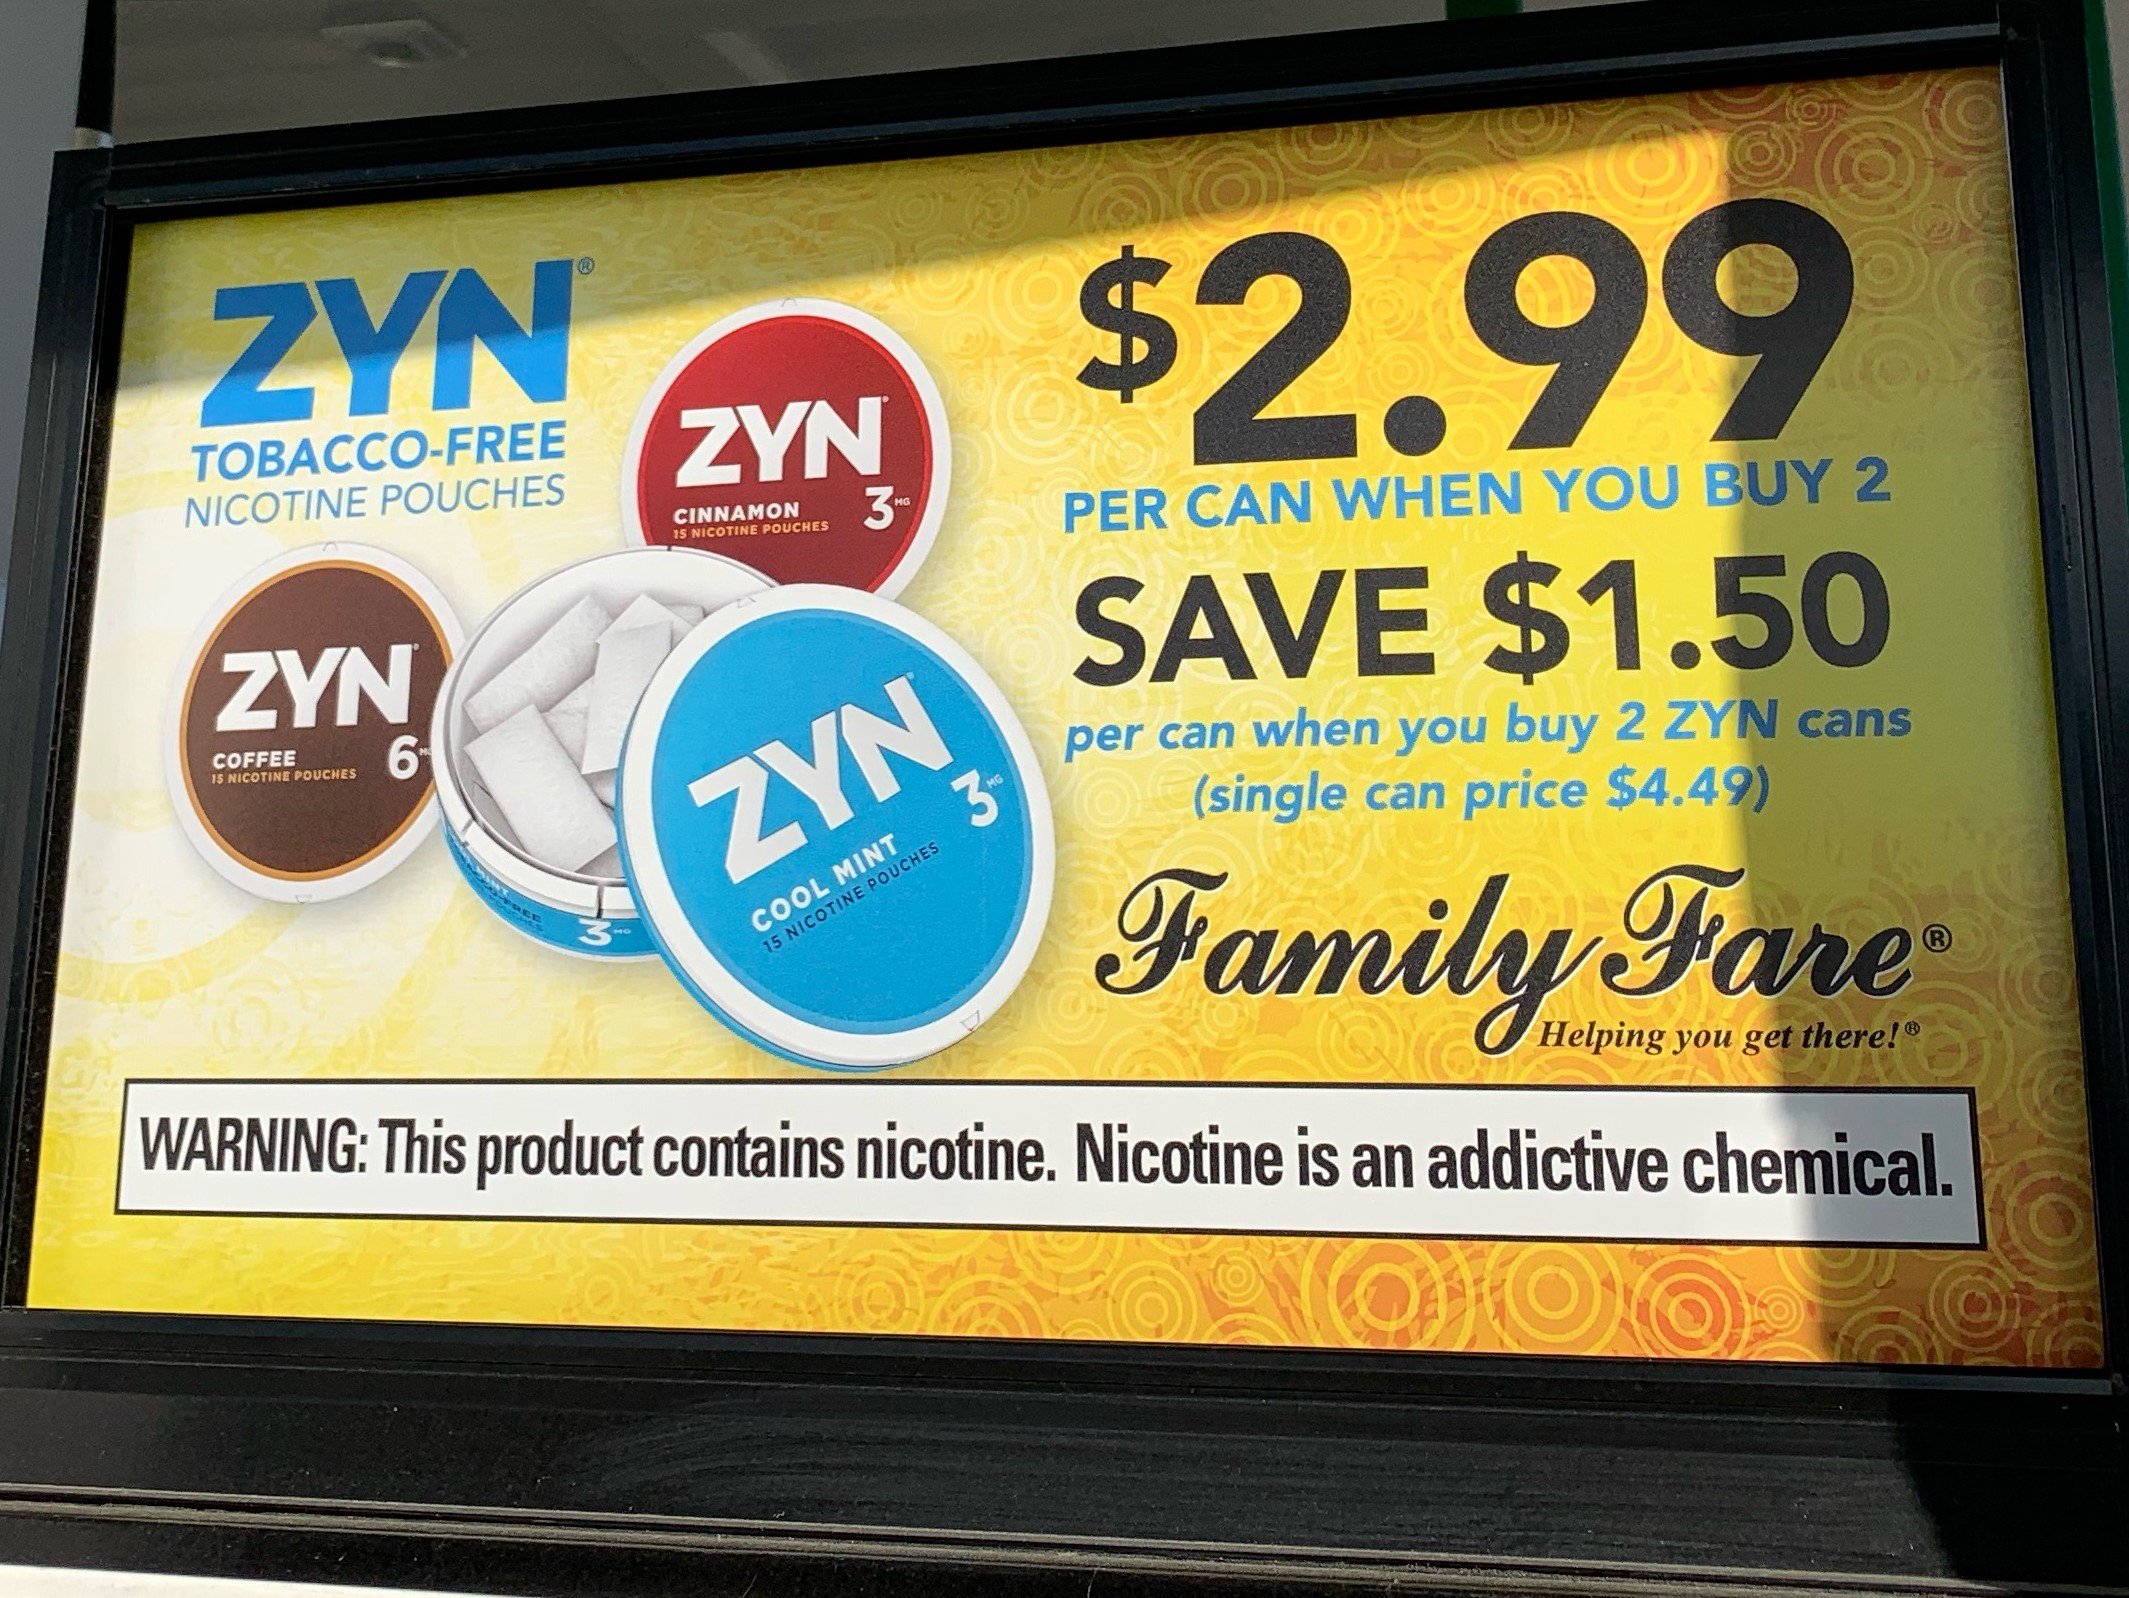 Ad for ZYN nicotine pouches